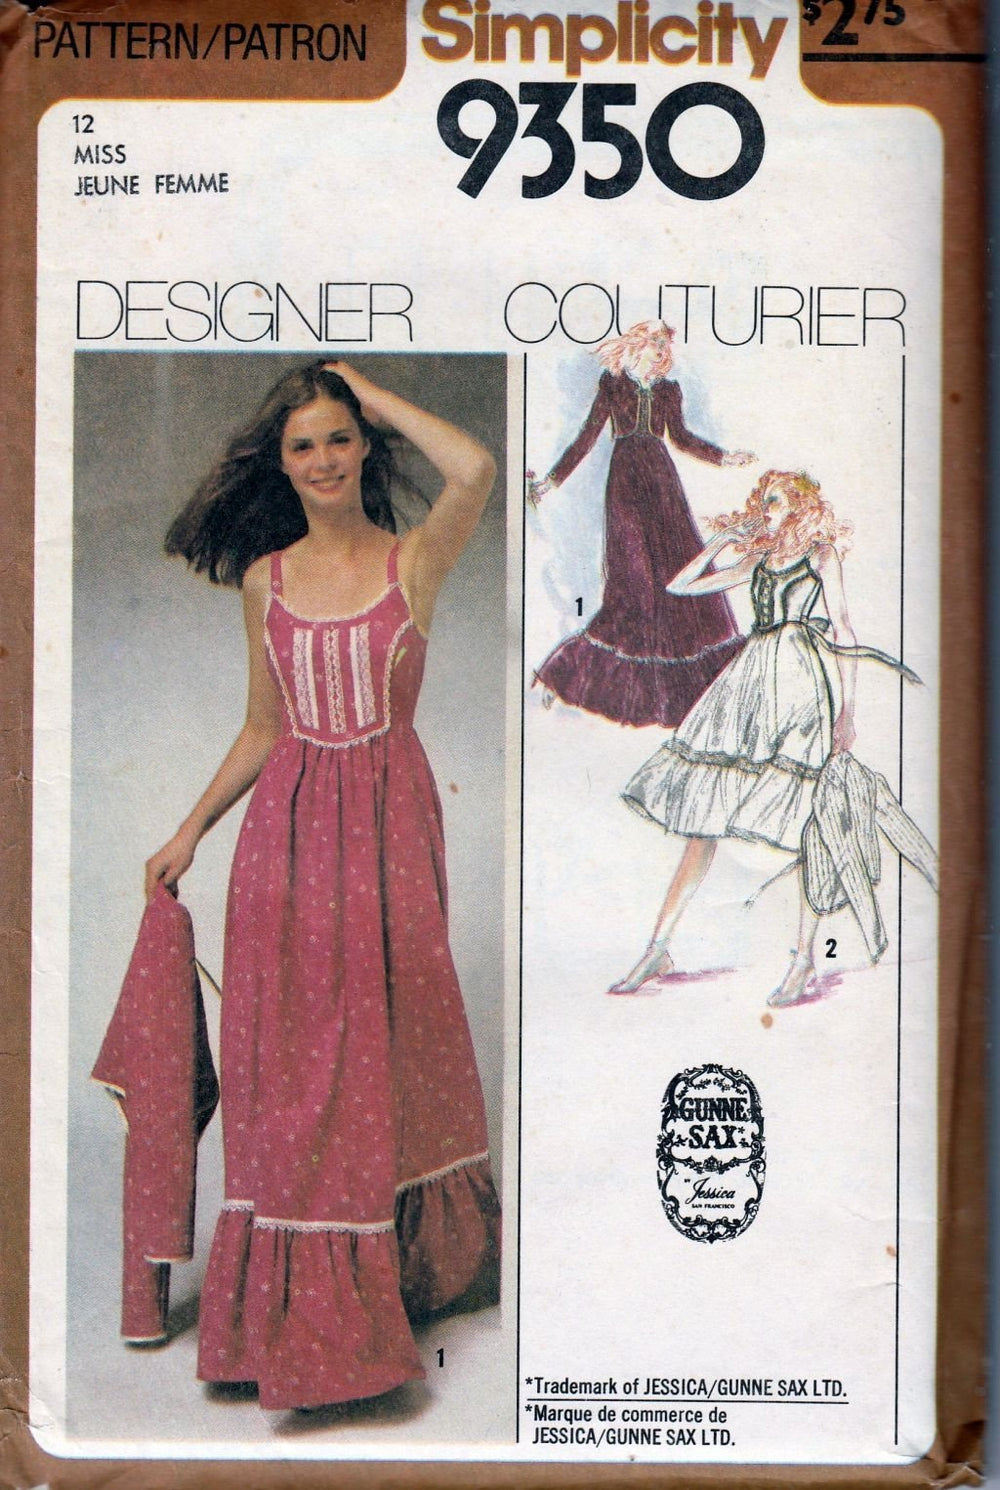 Simplicity 9350 Ladies Sundress Gown Jacket Vintage Sewing Pattern 1970's Designer Couturier - VintageStitching - Vintage Sewing Patterns